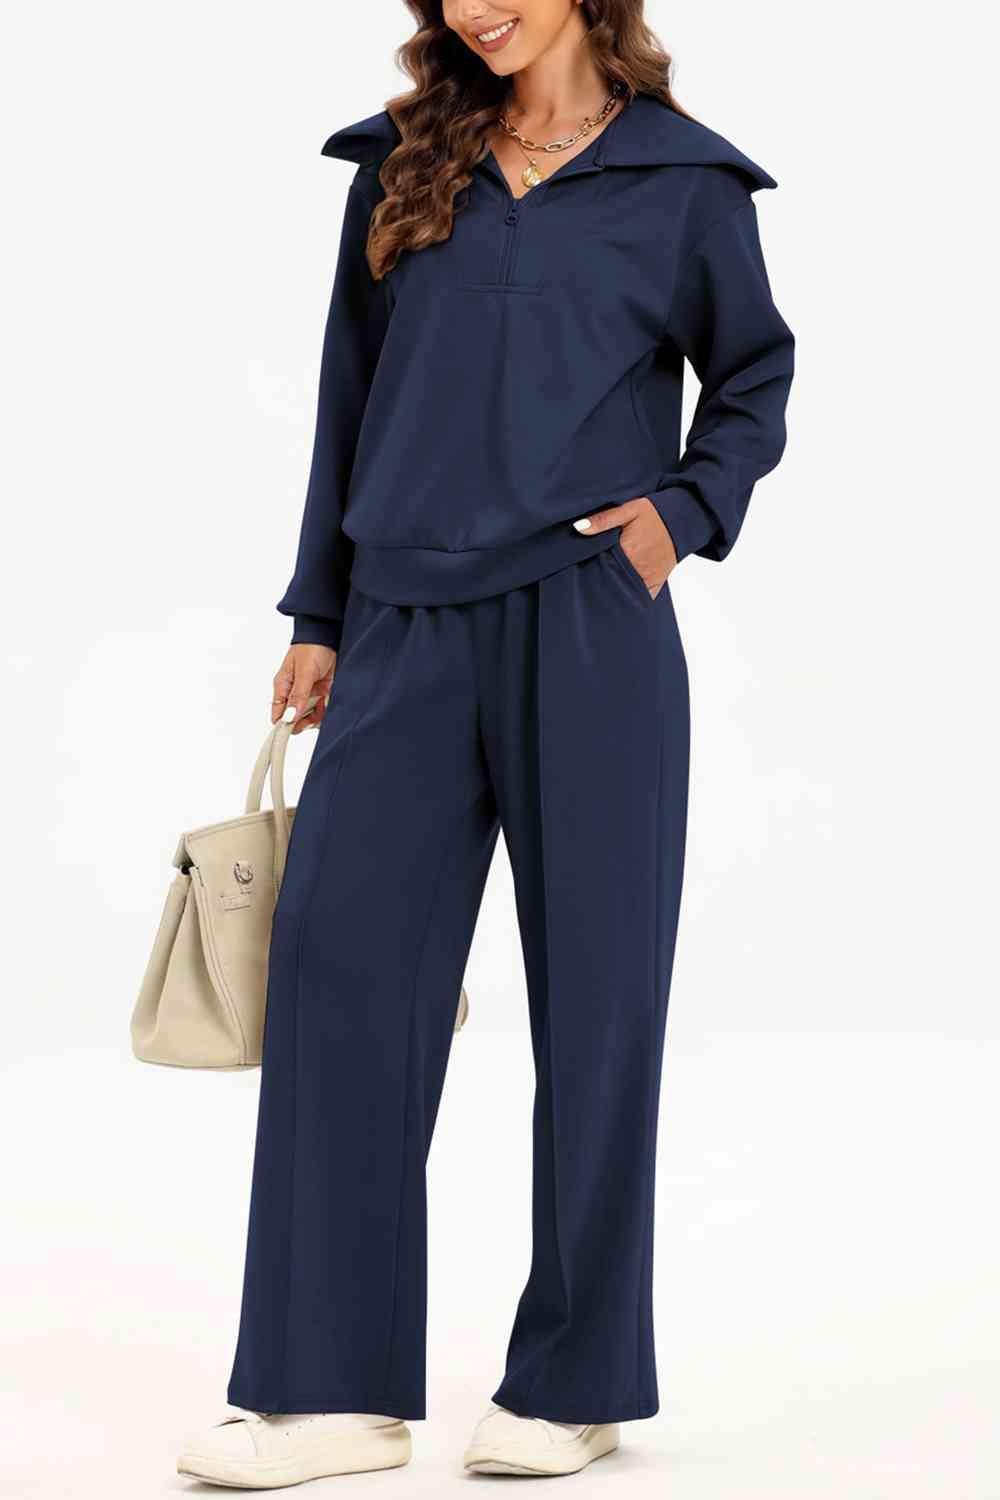 a woman wearing a blue jumpsuit and white shoes